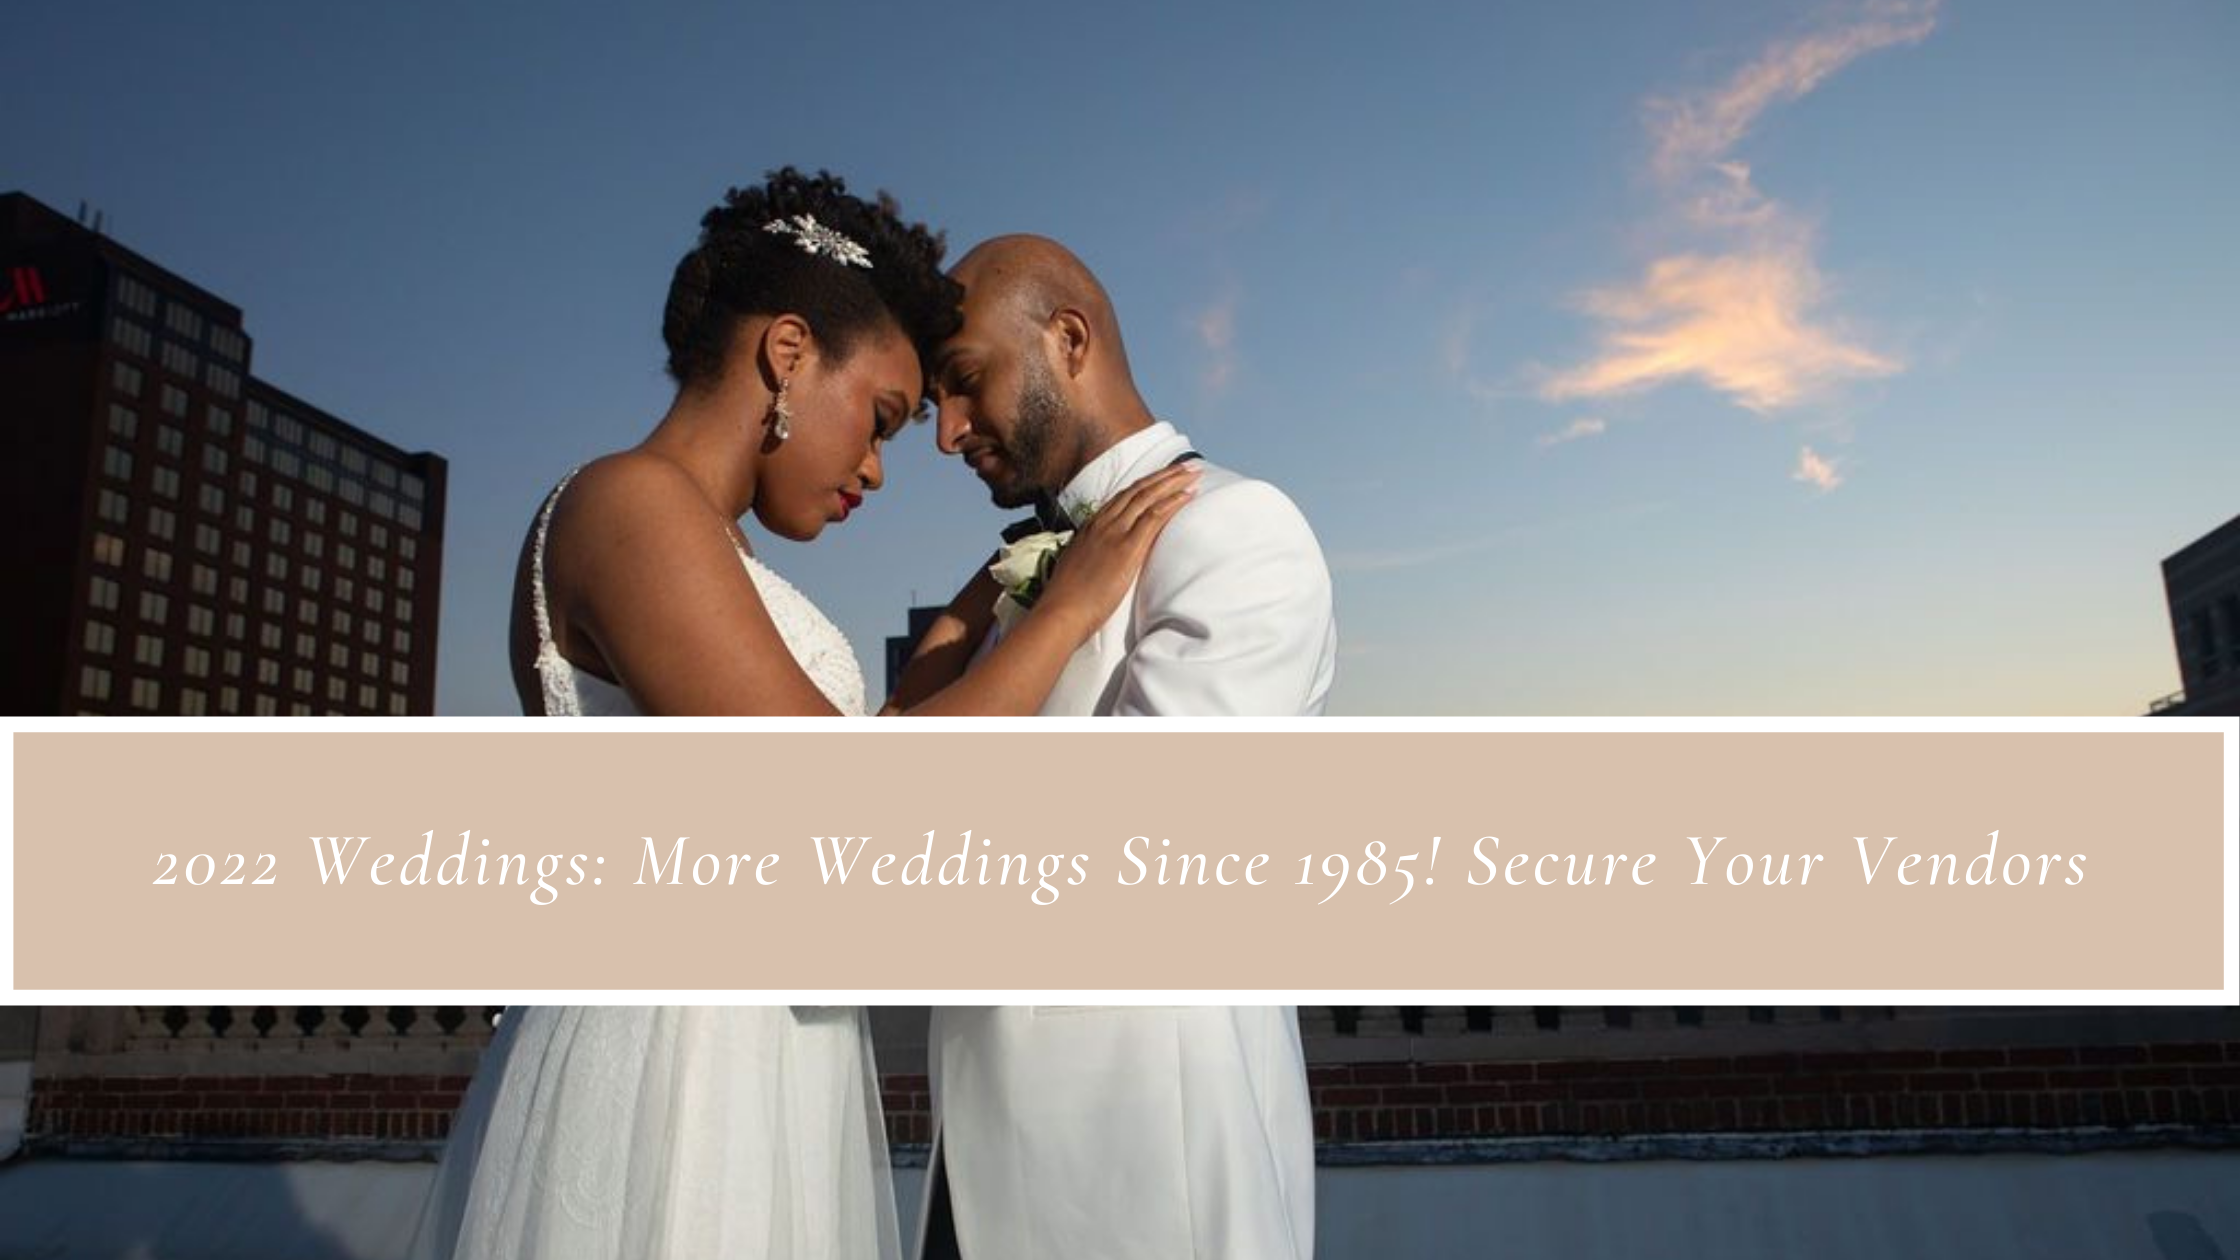 2022 Weddings: More Weddings Since 1985! Secure Your Vendors